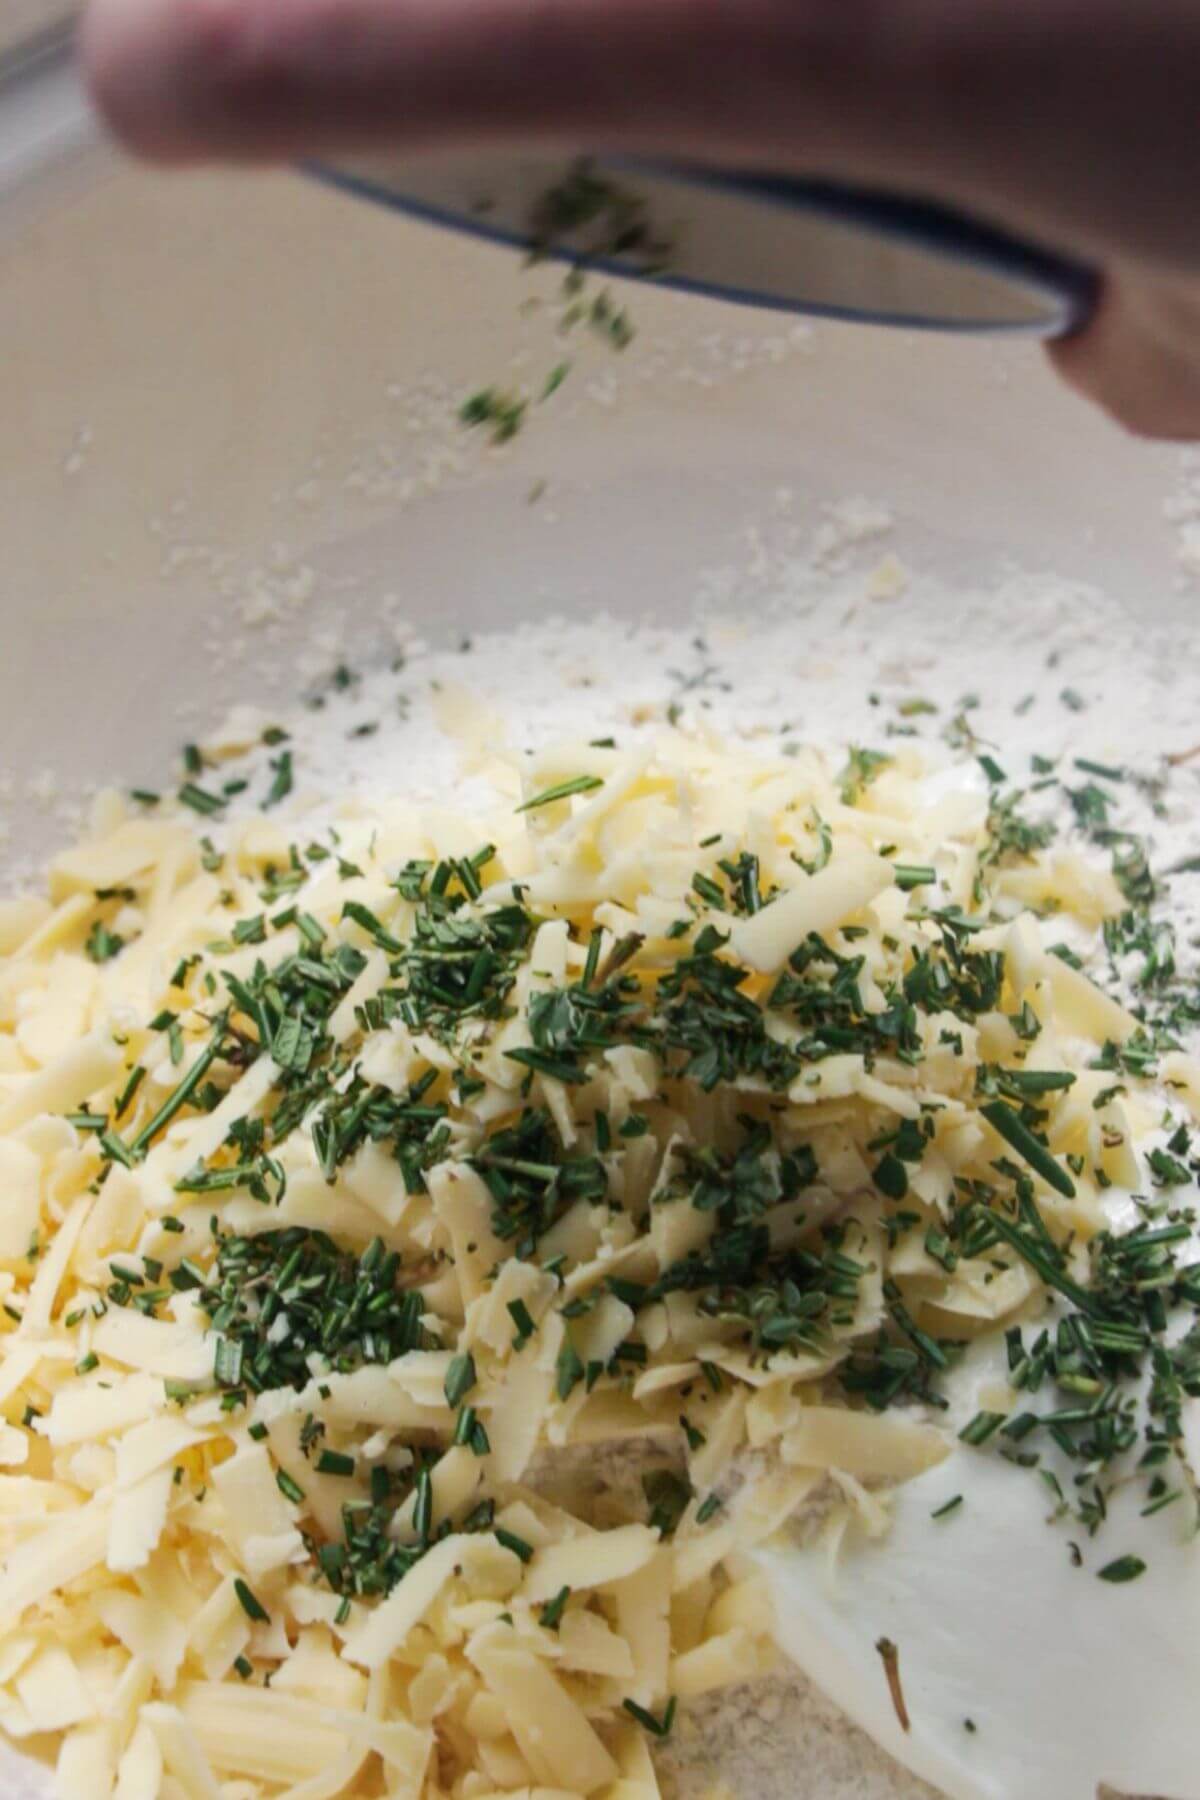 Chopped rosemary and thyme being added to a large bowl with yogurt, cheese and flour.